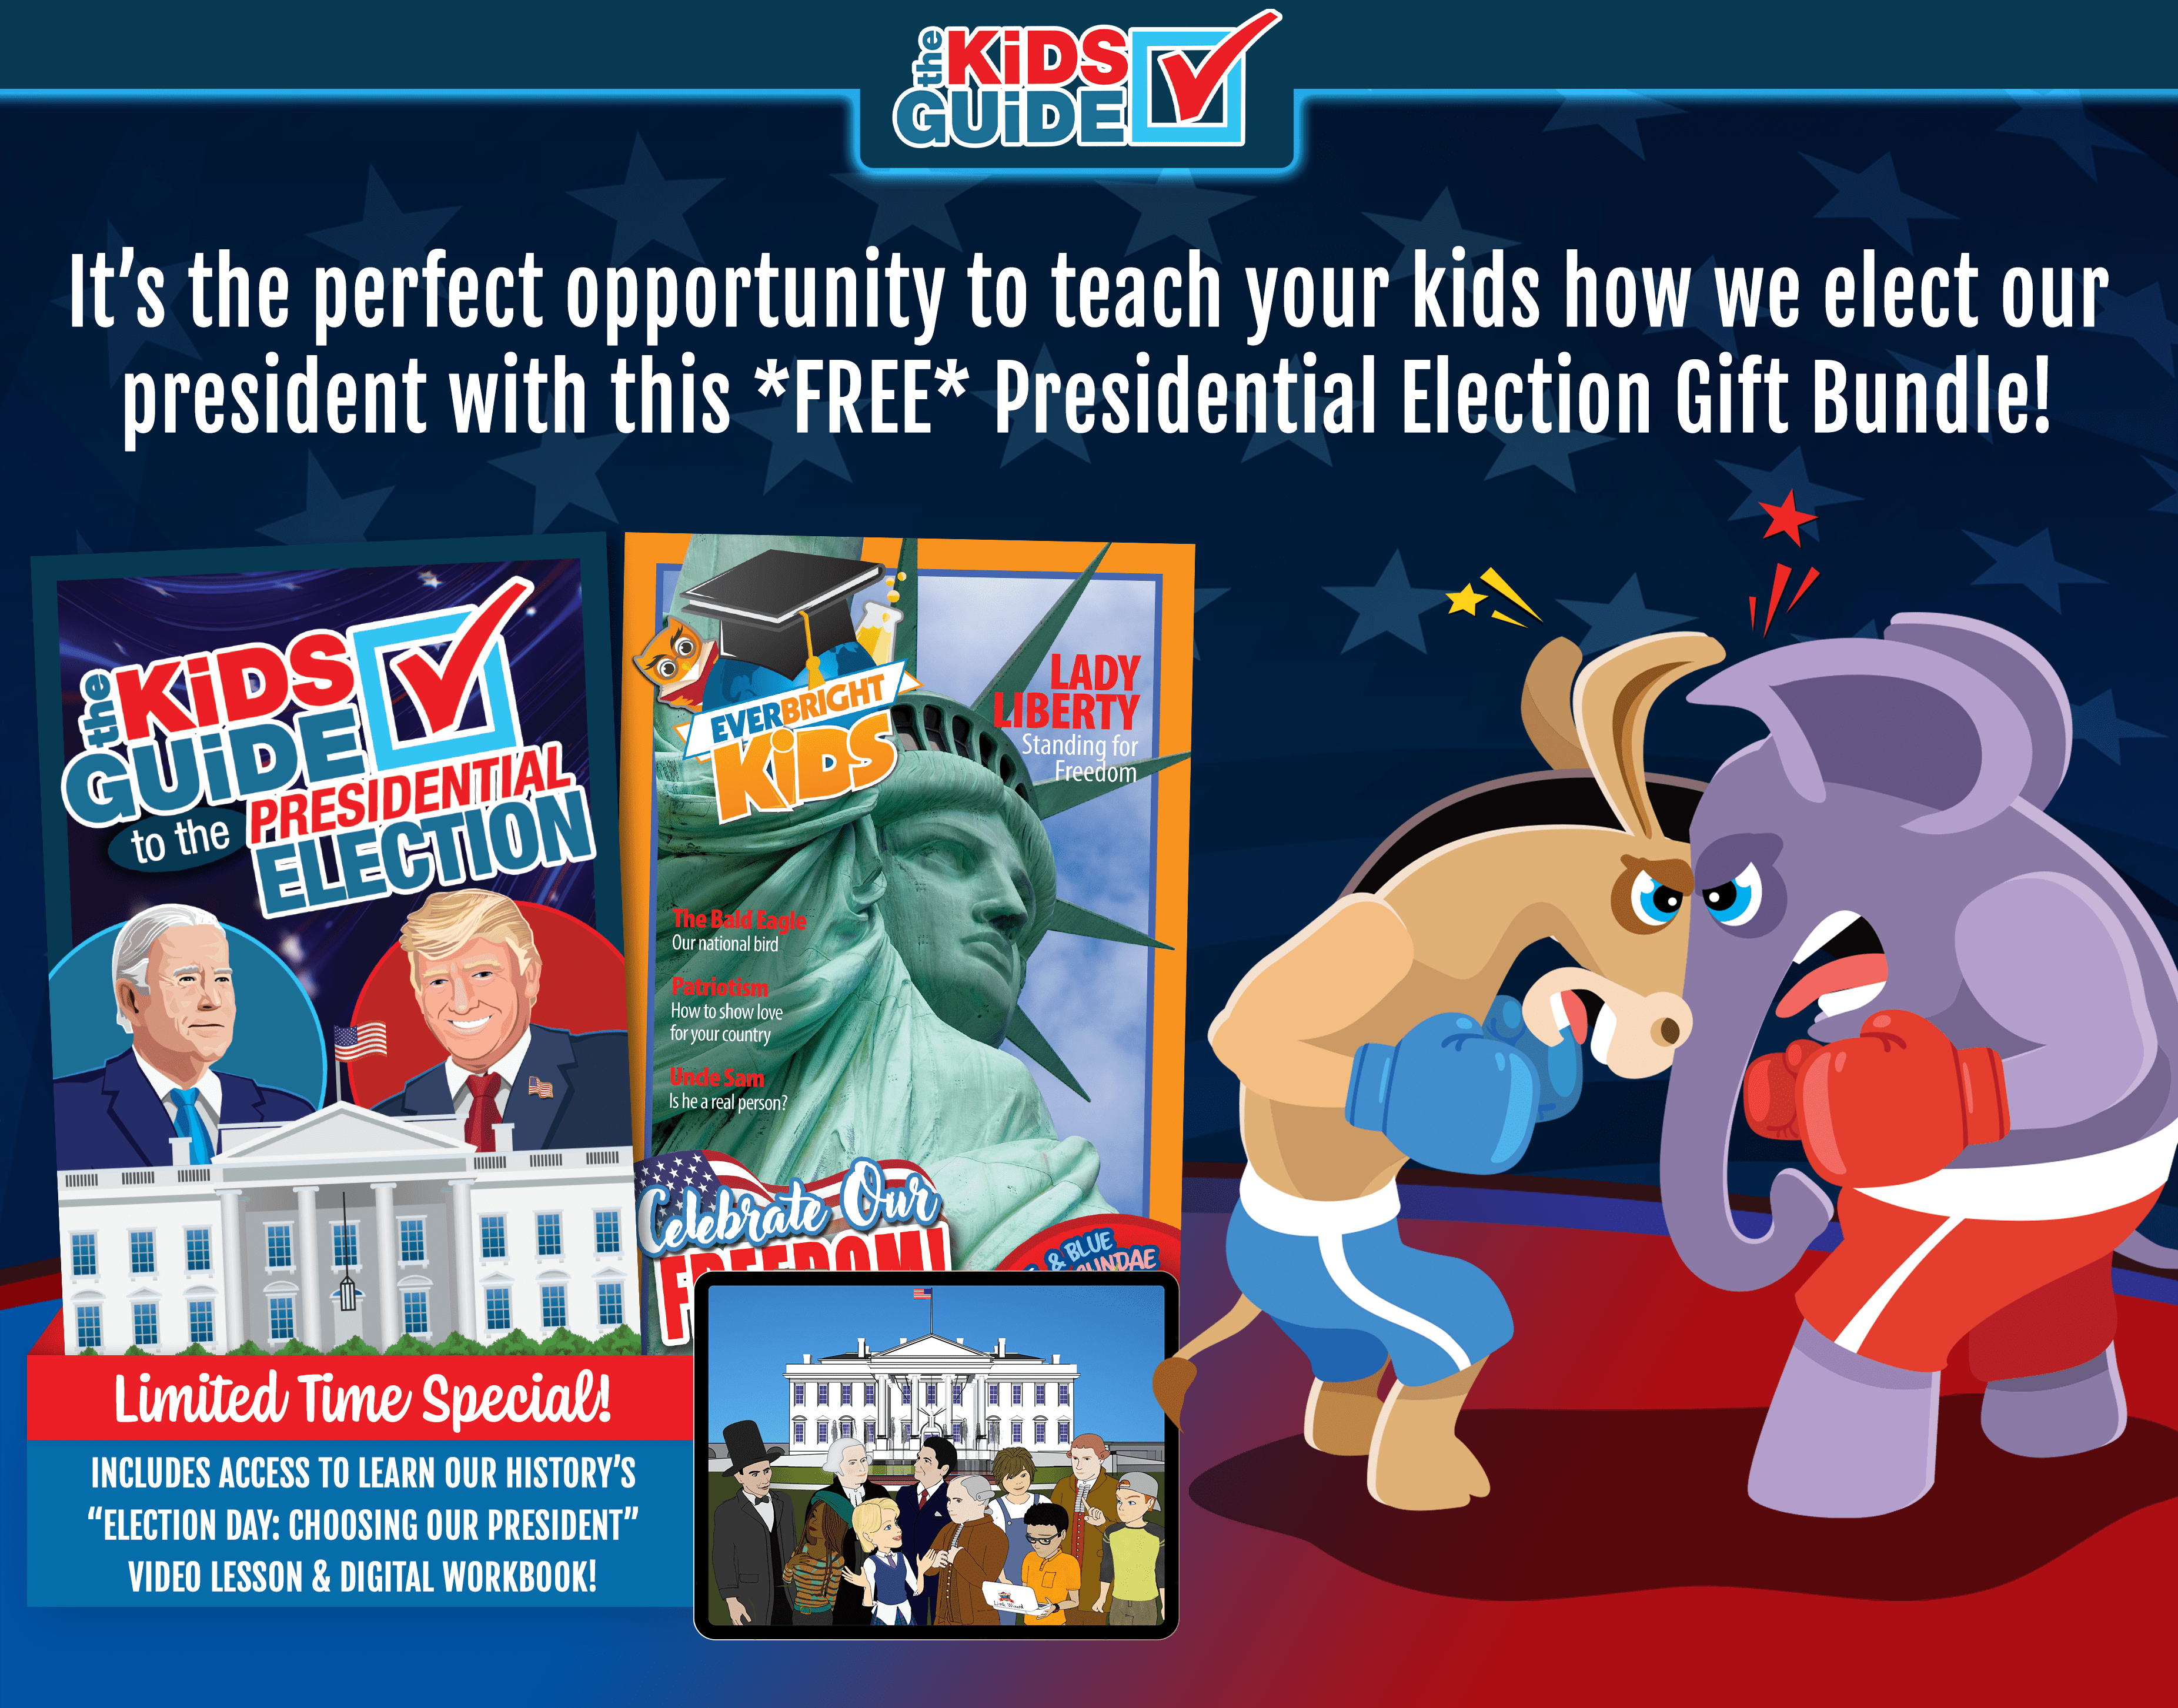 The Kids Guide to the Presidential Election